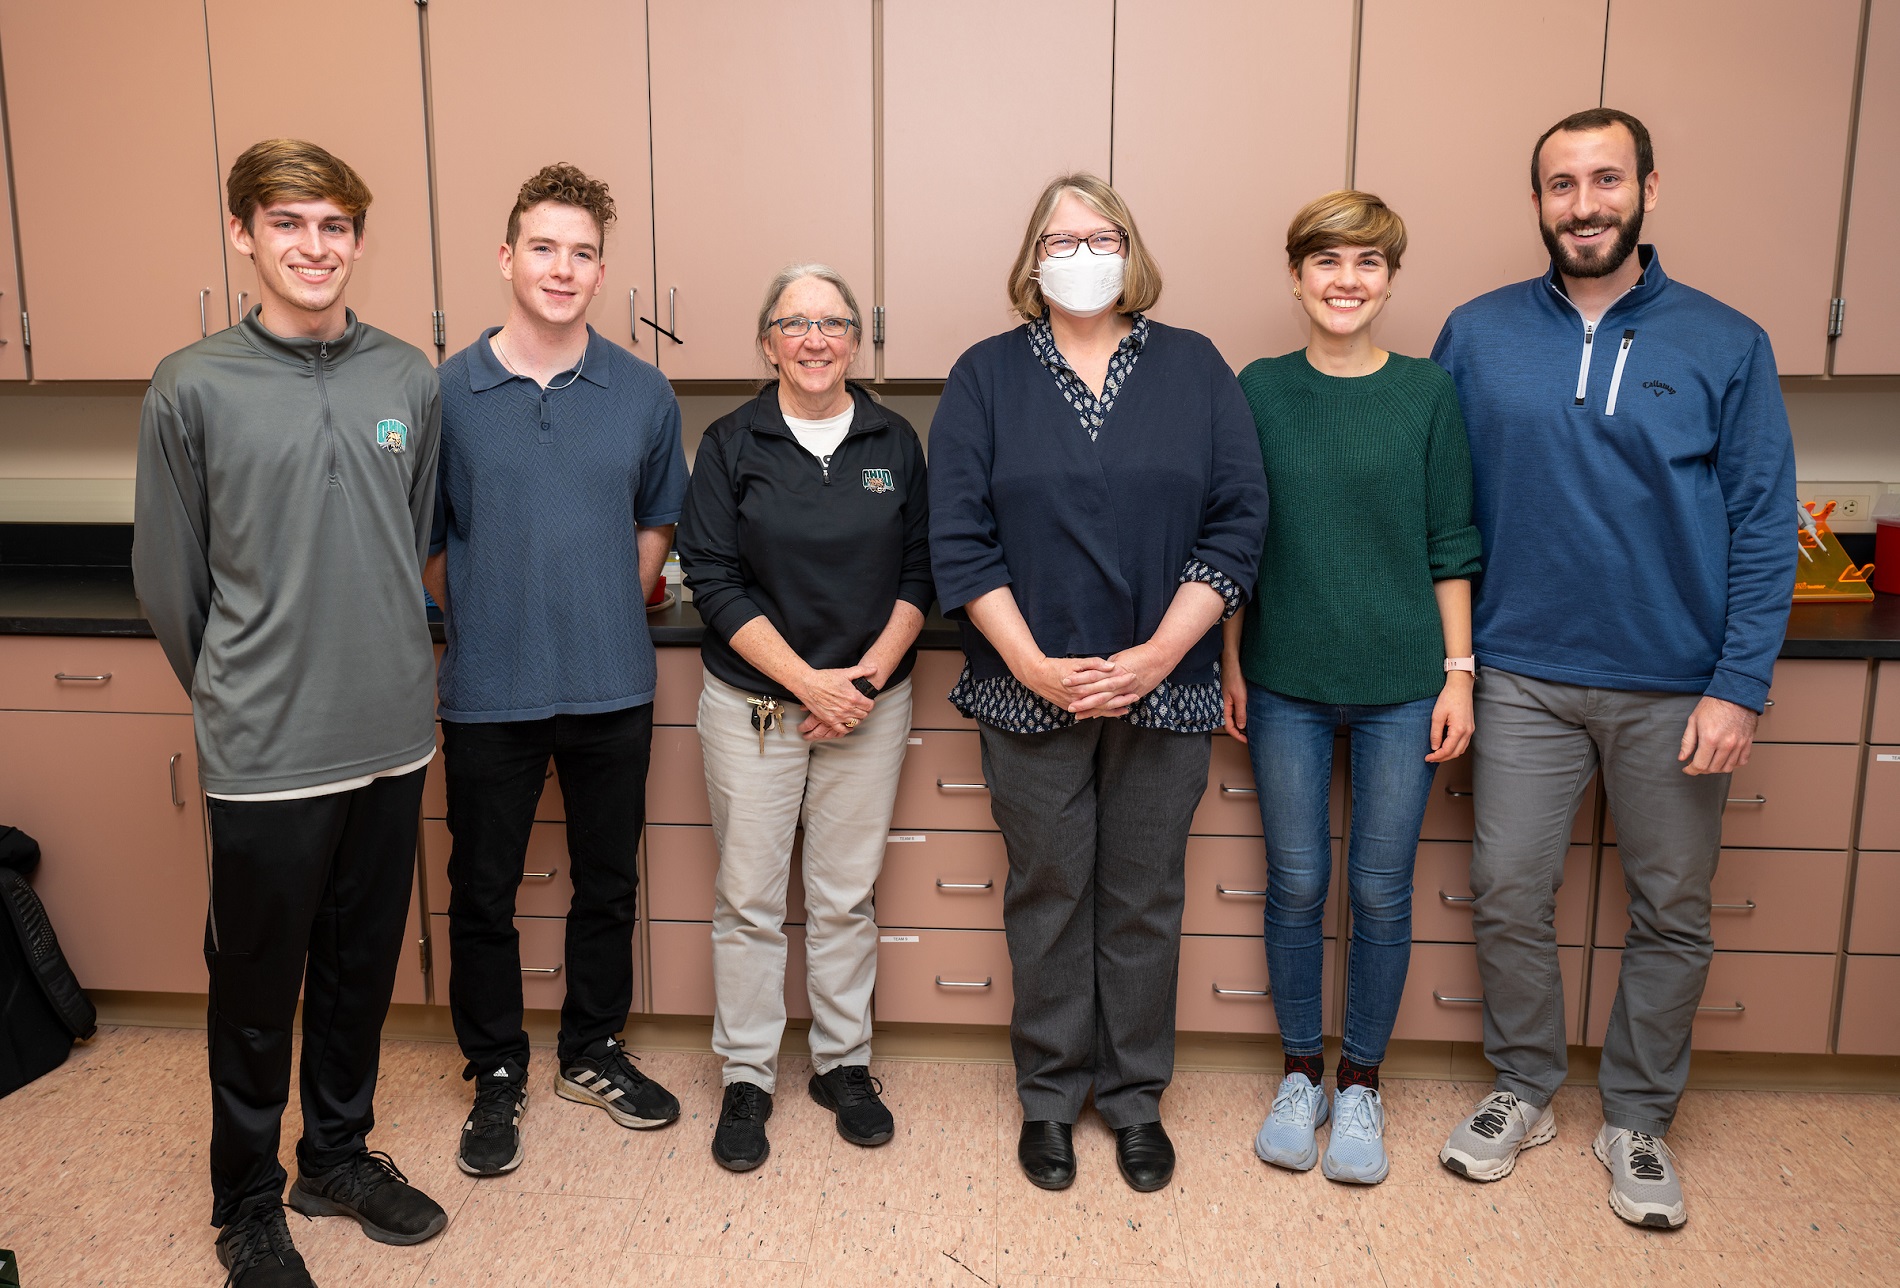 Students Michael Lane, Nathan Smith and Victoria Swiler are shown with facilitator Nick Whitticar and Dr. Sarah Wyatt and Dr. Elizabeth Sayrs